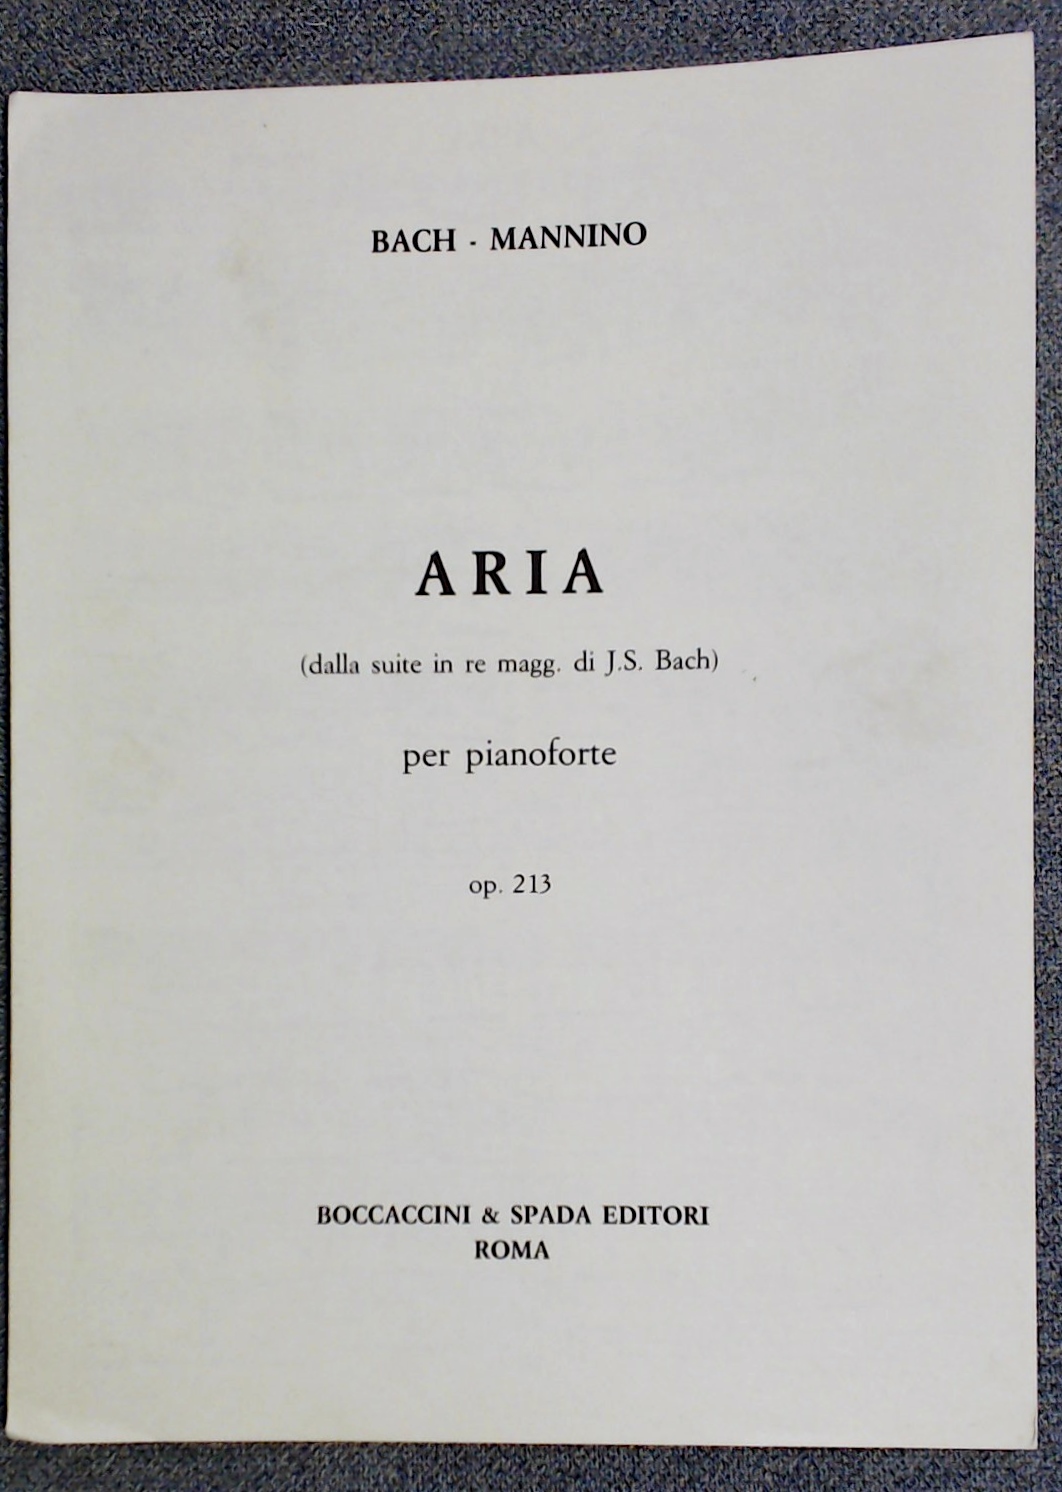 Bach - Mannino Aria From Bach's D Major Piano Op 213 Suite - Click Image to Close